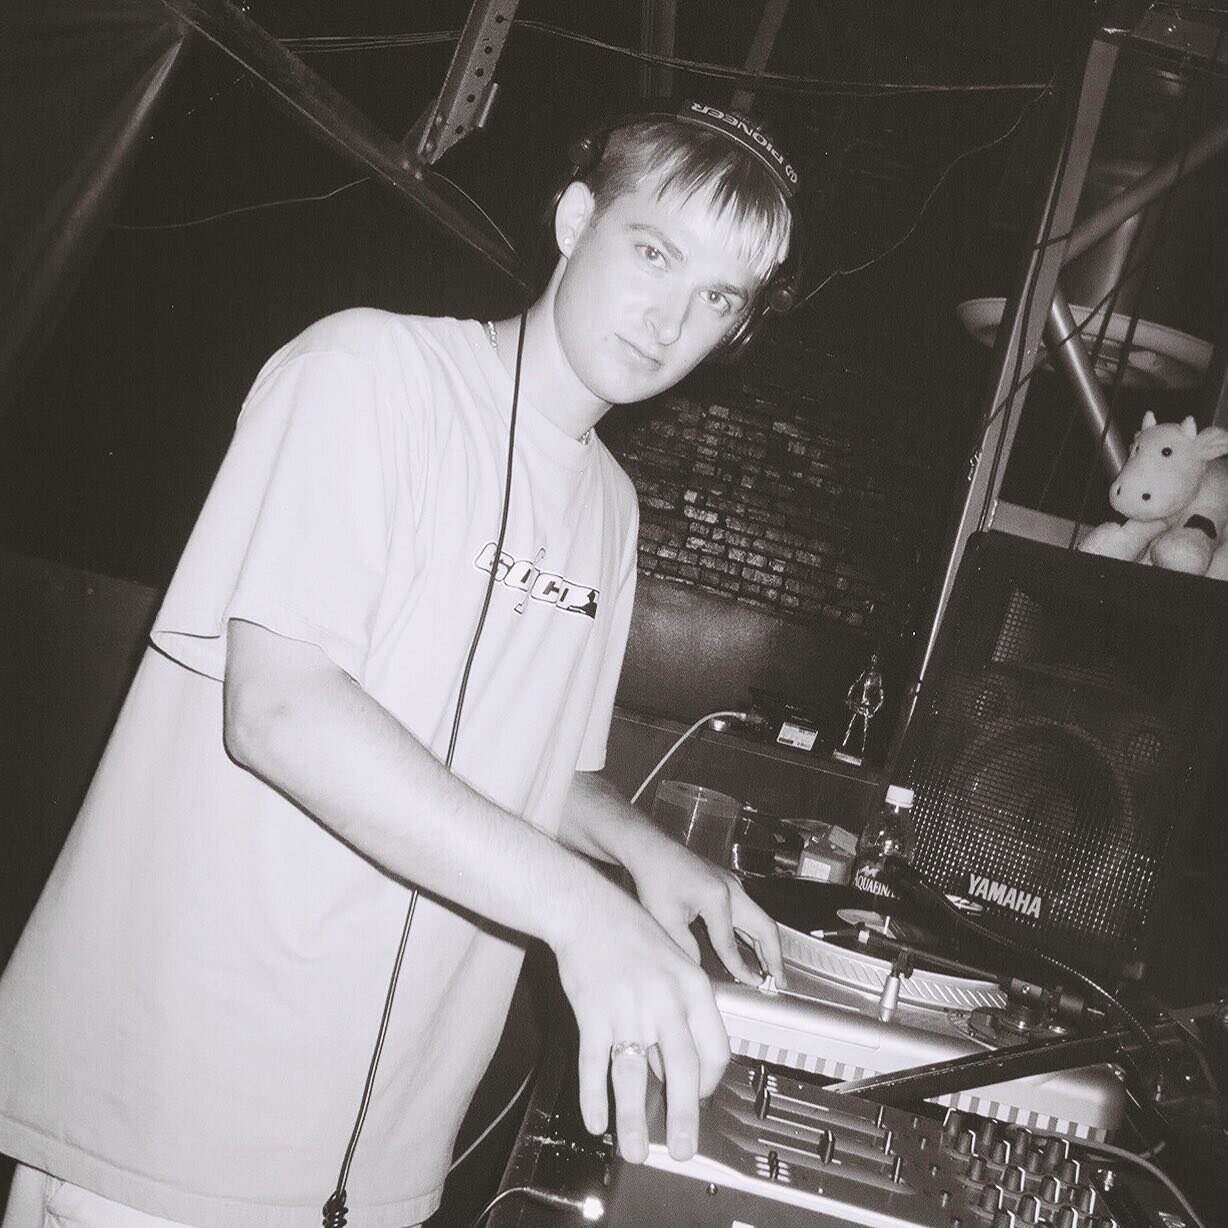 #TBT to summer of 2003, spinning an after hours set in Nashville at the old Katatonic after hours spot. I remember stuffing about 5 crates of records and 2 tanks of CO2 into the Prelude for this trip 😂 Also peep the original Pioneer DJ headphones - 